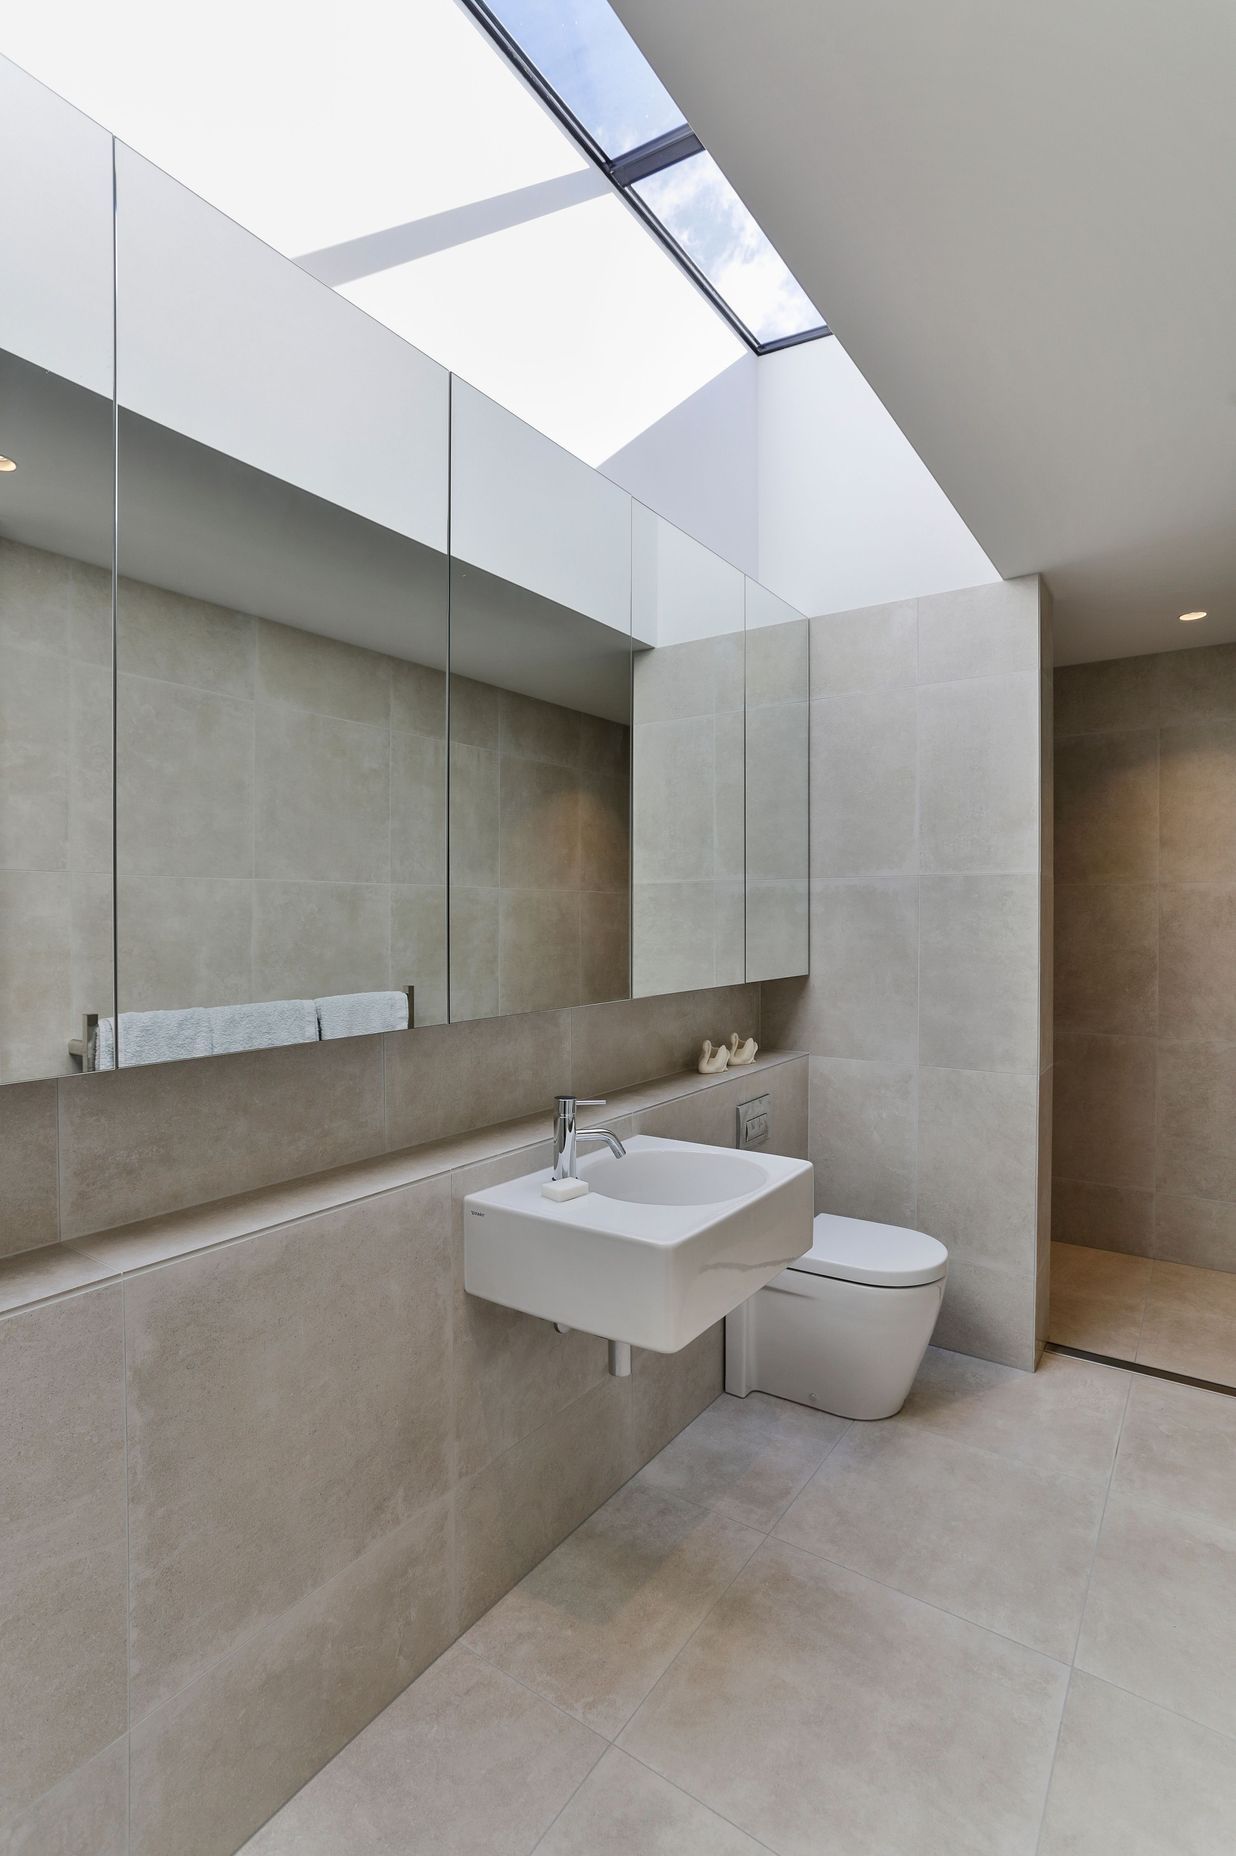 Even the upstairs bathroom has a skylight to flood the space with light.